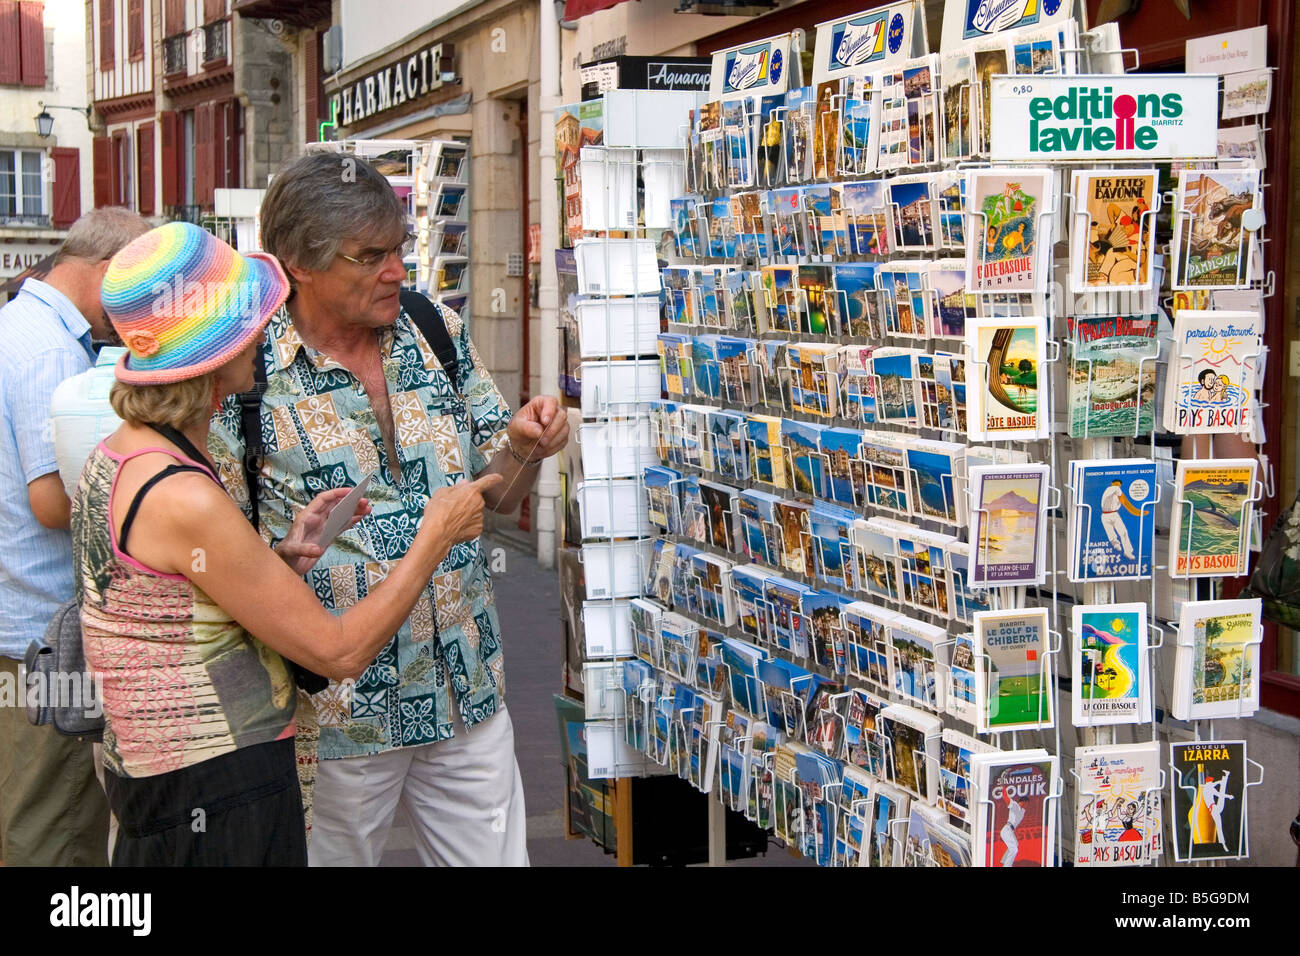 Tourists shop for postcards in the town of Saint Jean de Luz Pyrenees Atlantiques French Basque Country Southwest France Stock Photo